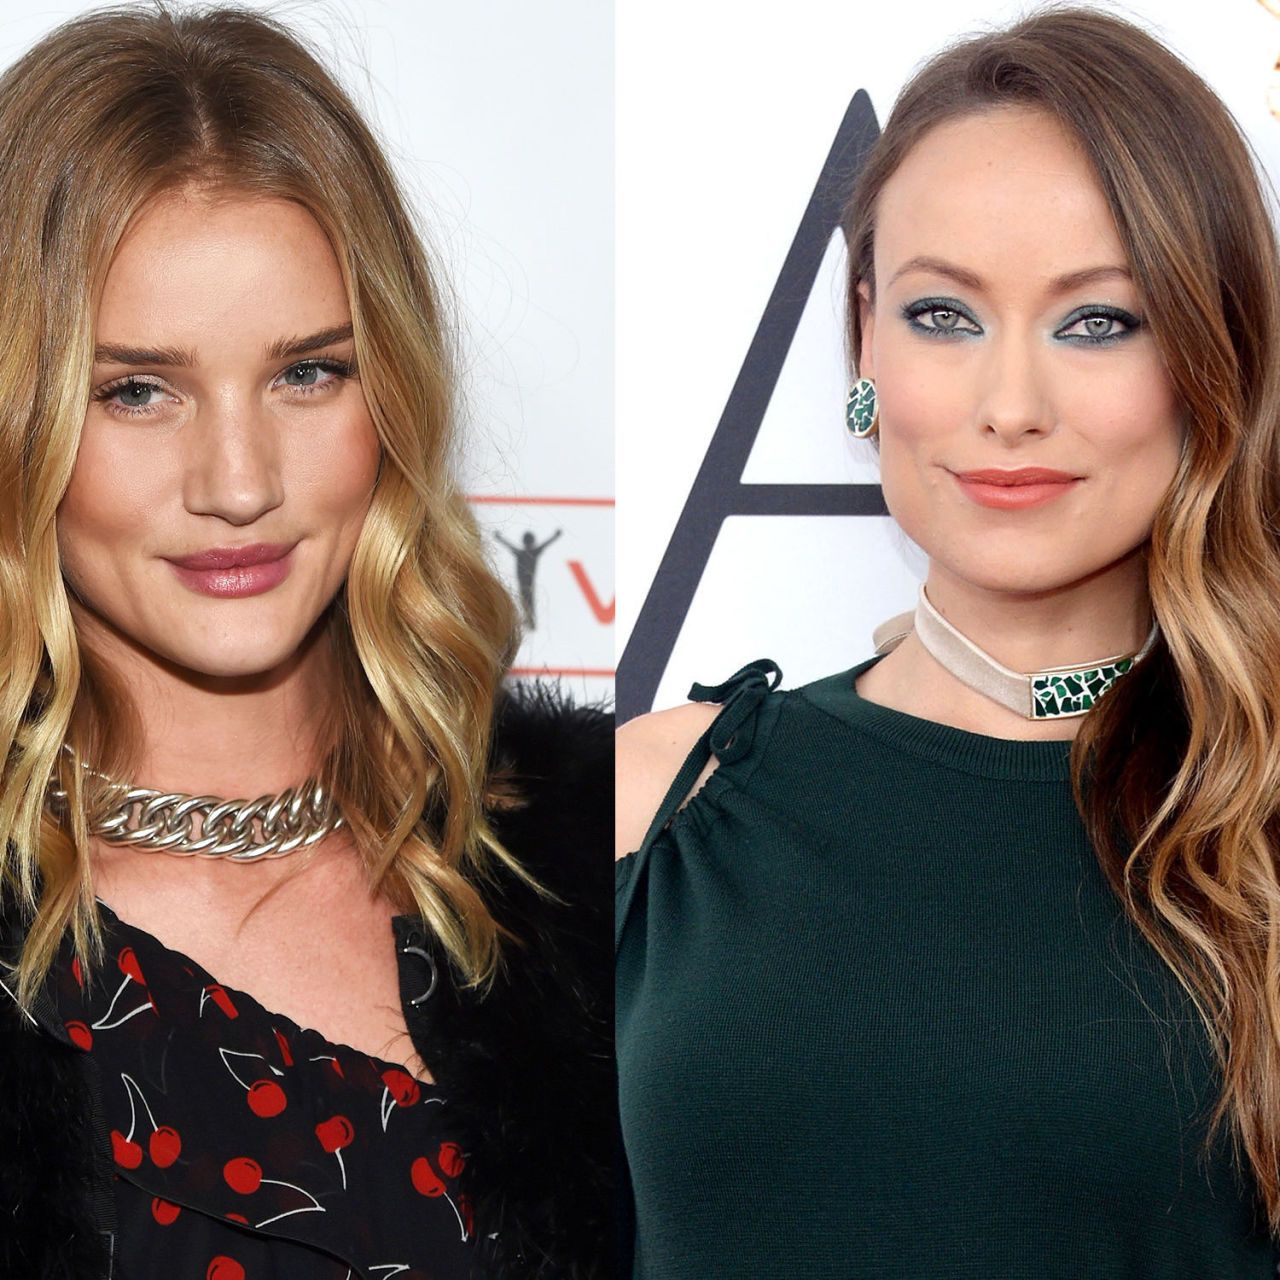 13 Balayage Hair Color Looks to Copy - Best Celebrity Balayage Highlights